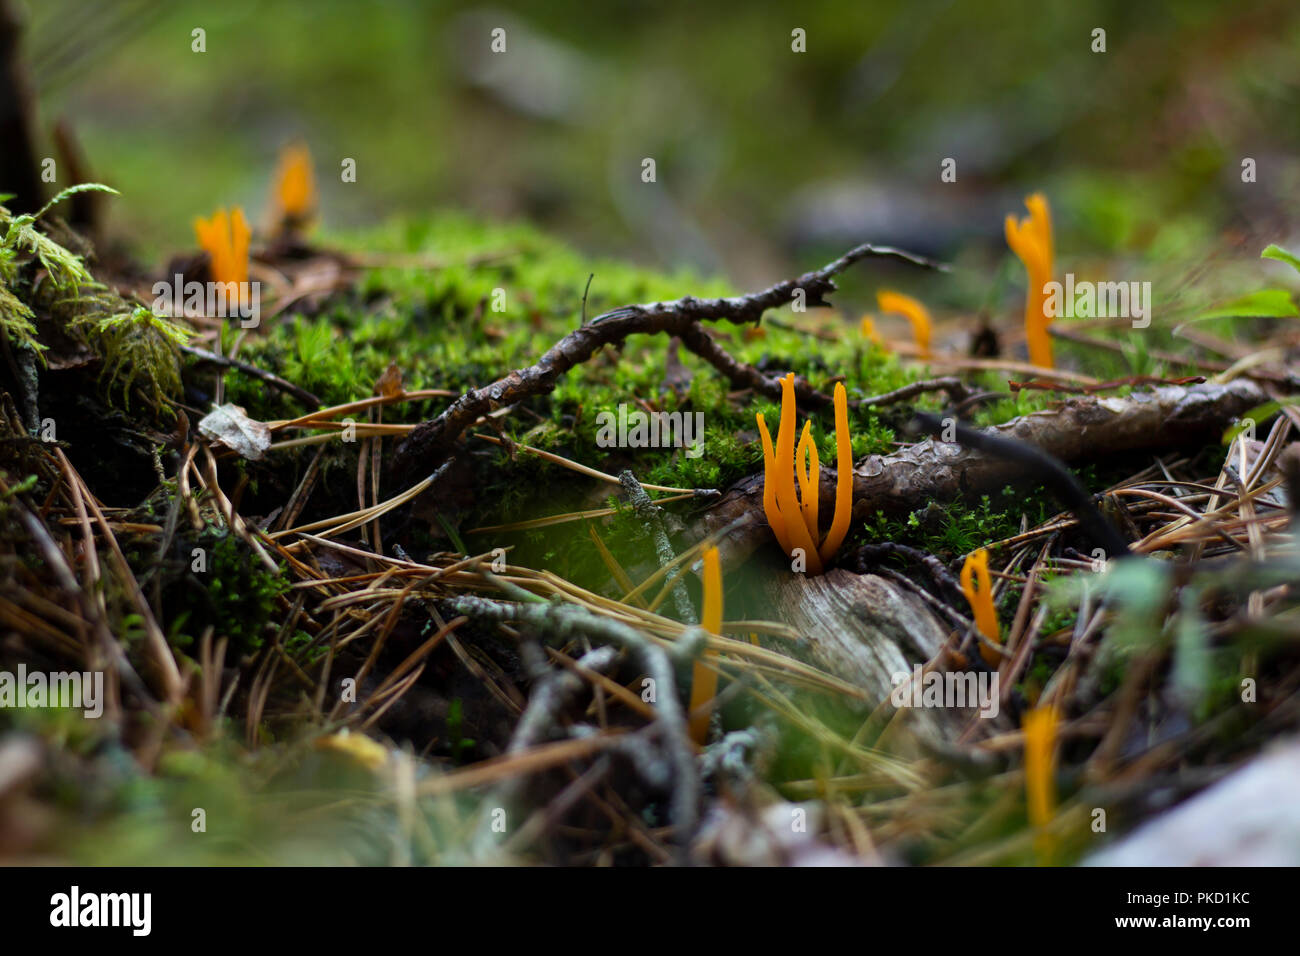 Yellow mushrooms among branches and green moss. Stock Photo